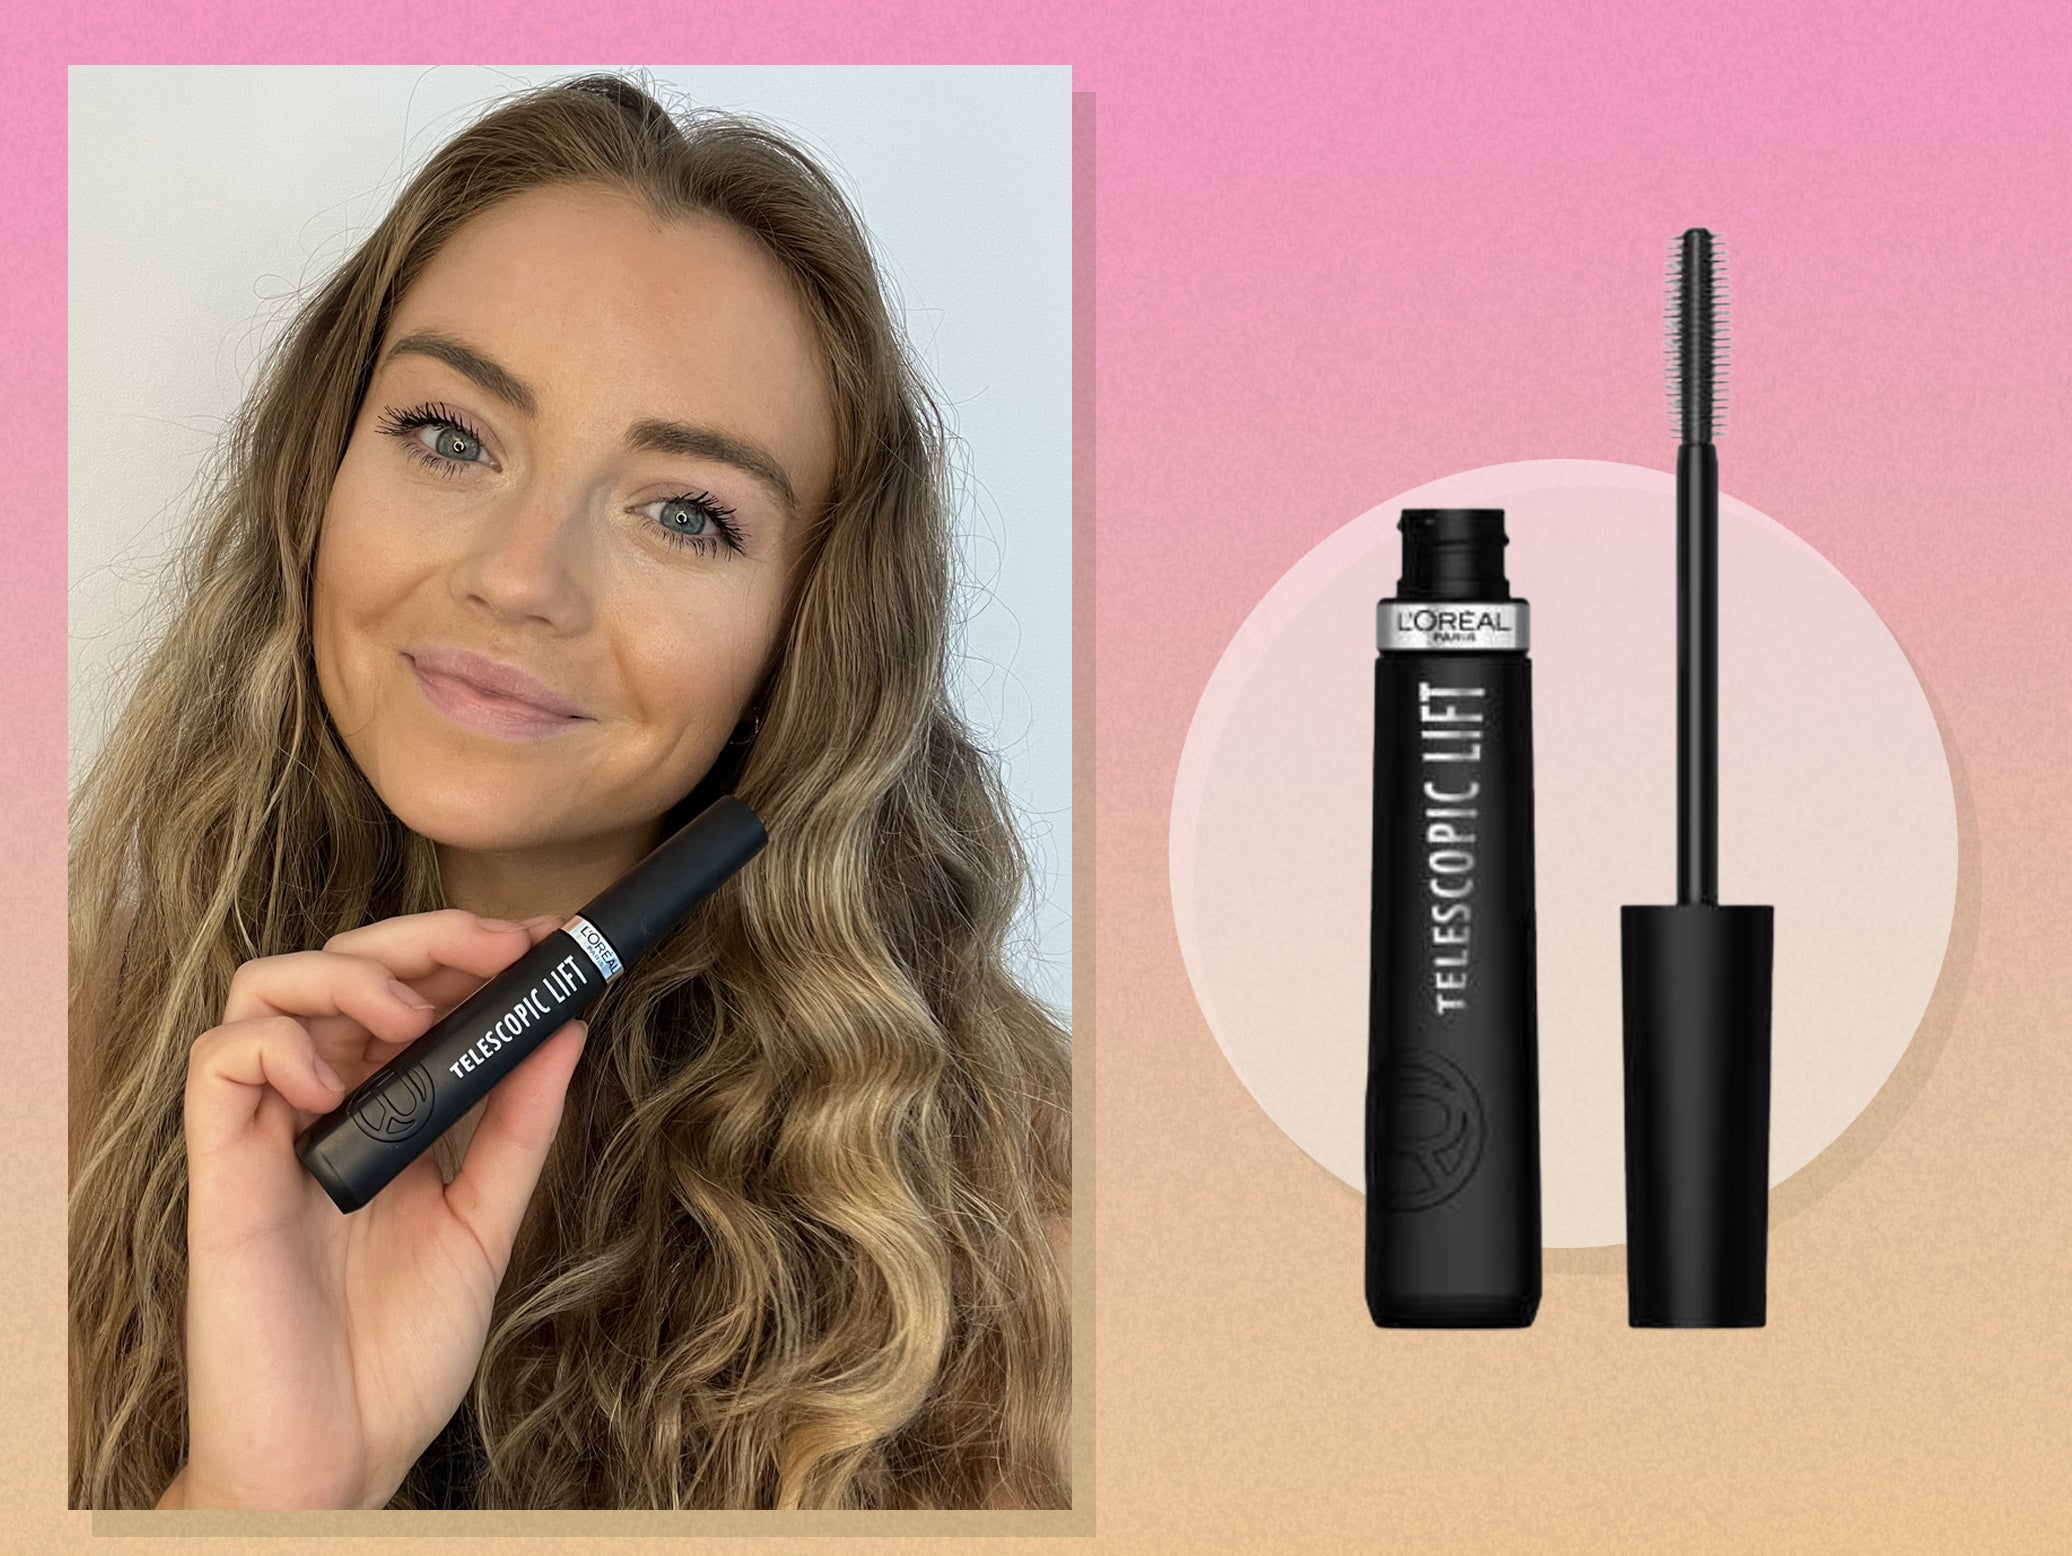 This mascara is causing quite the stir online